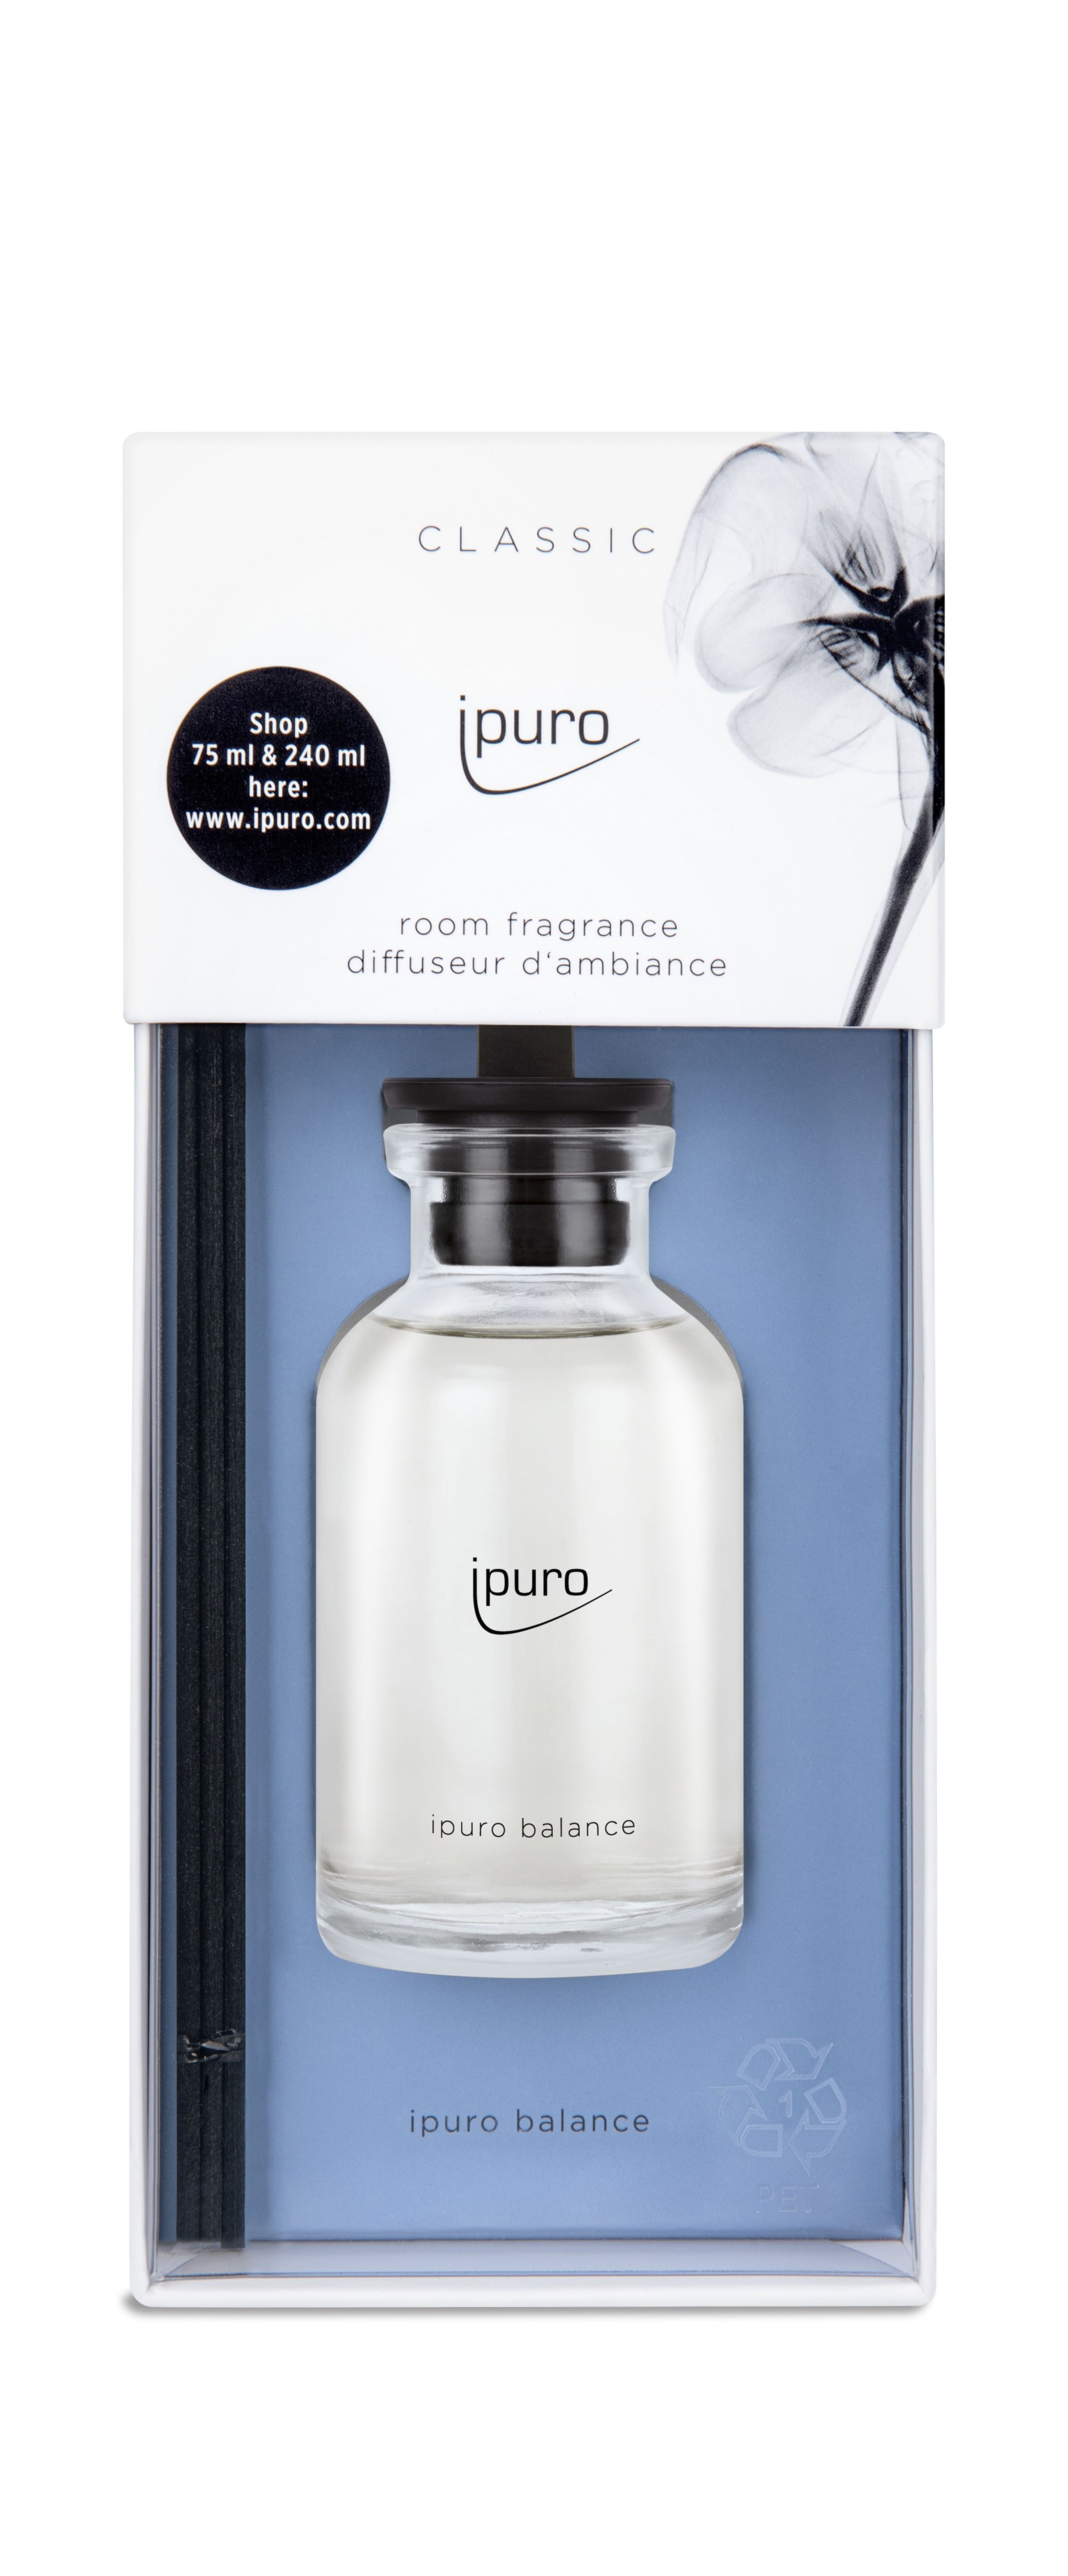 Compare prices for Ipuro across all European  stores